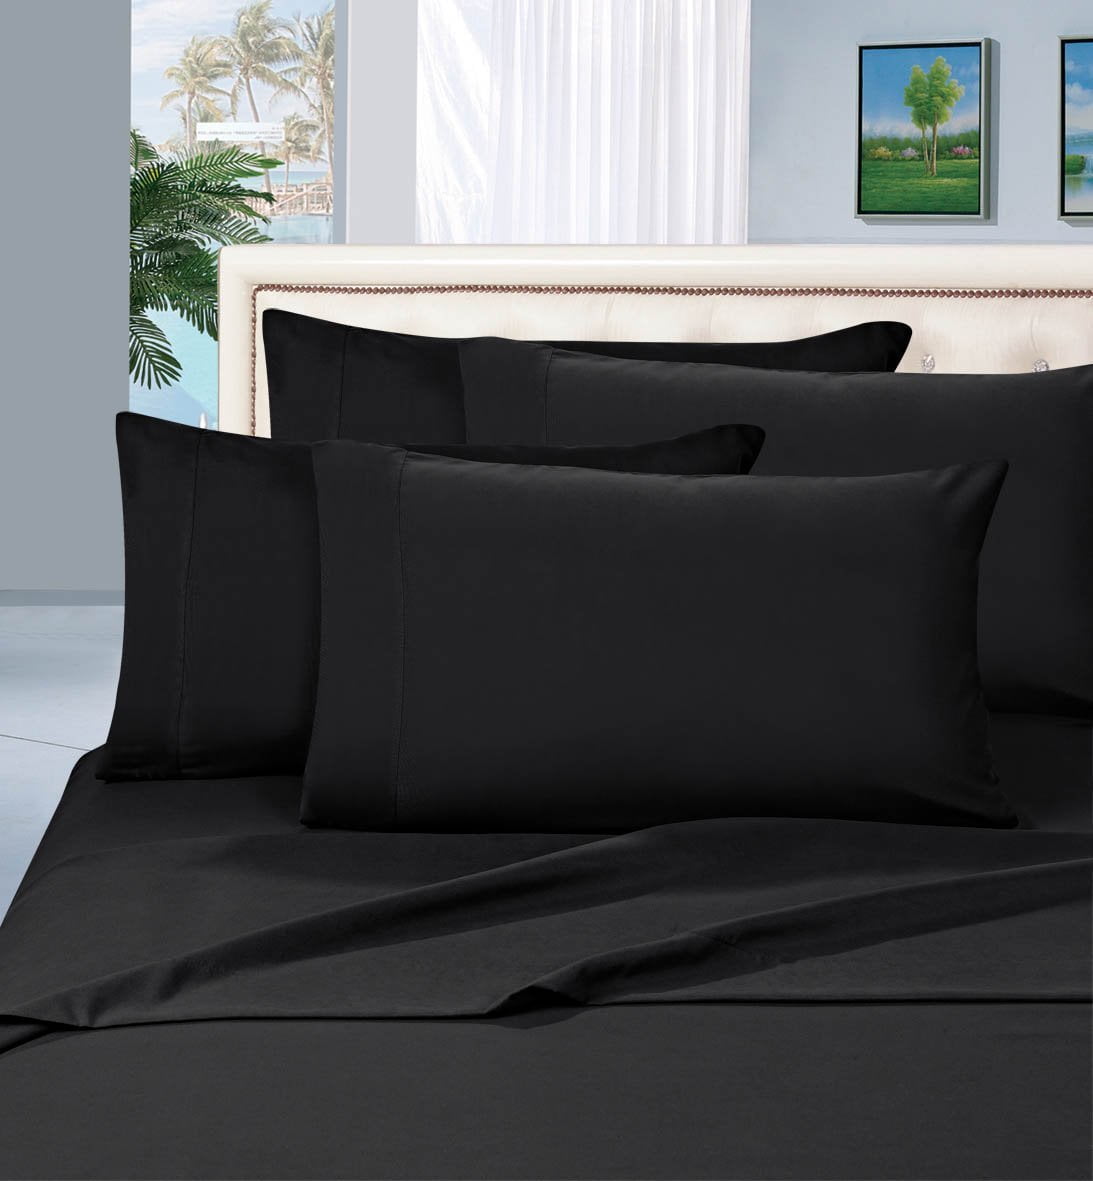 Dee Details about   HOMEIDEAS Bed Sheets Set Extra Soft Brushed Microfiber 1800 Bedding Sheets 